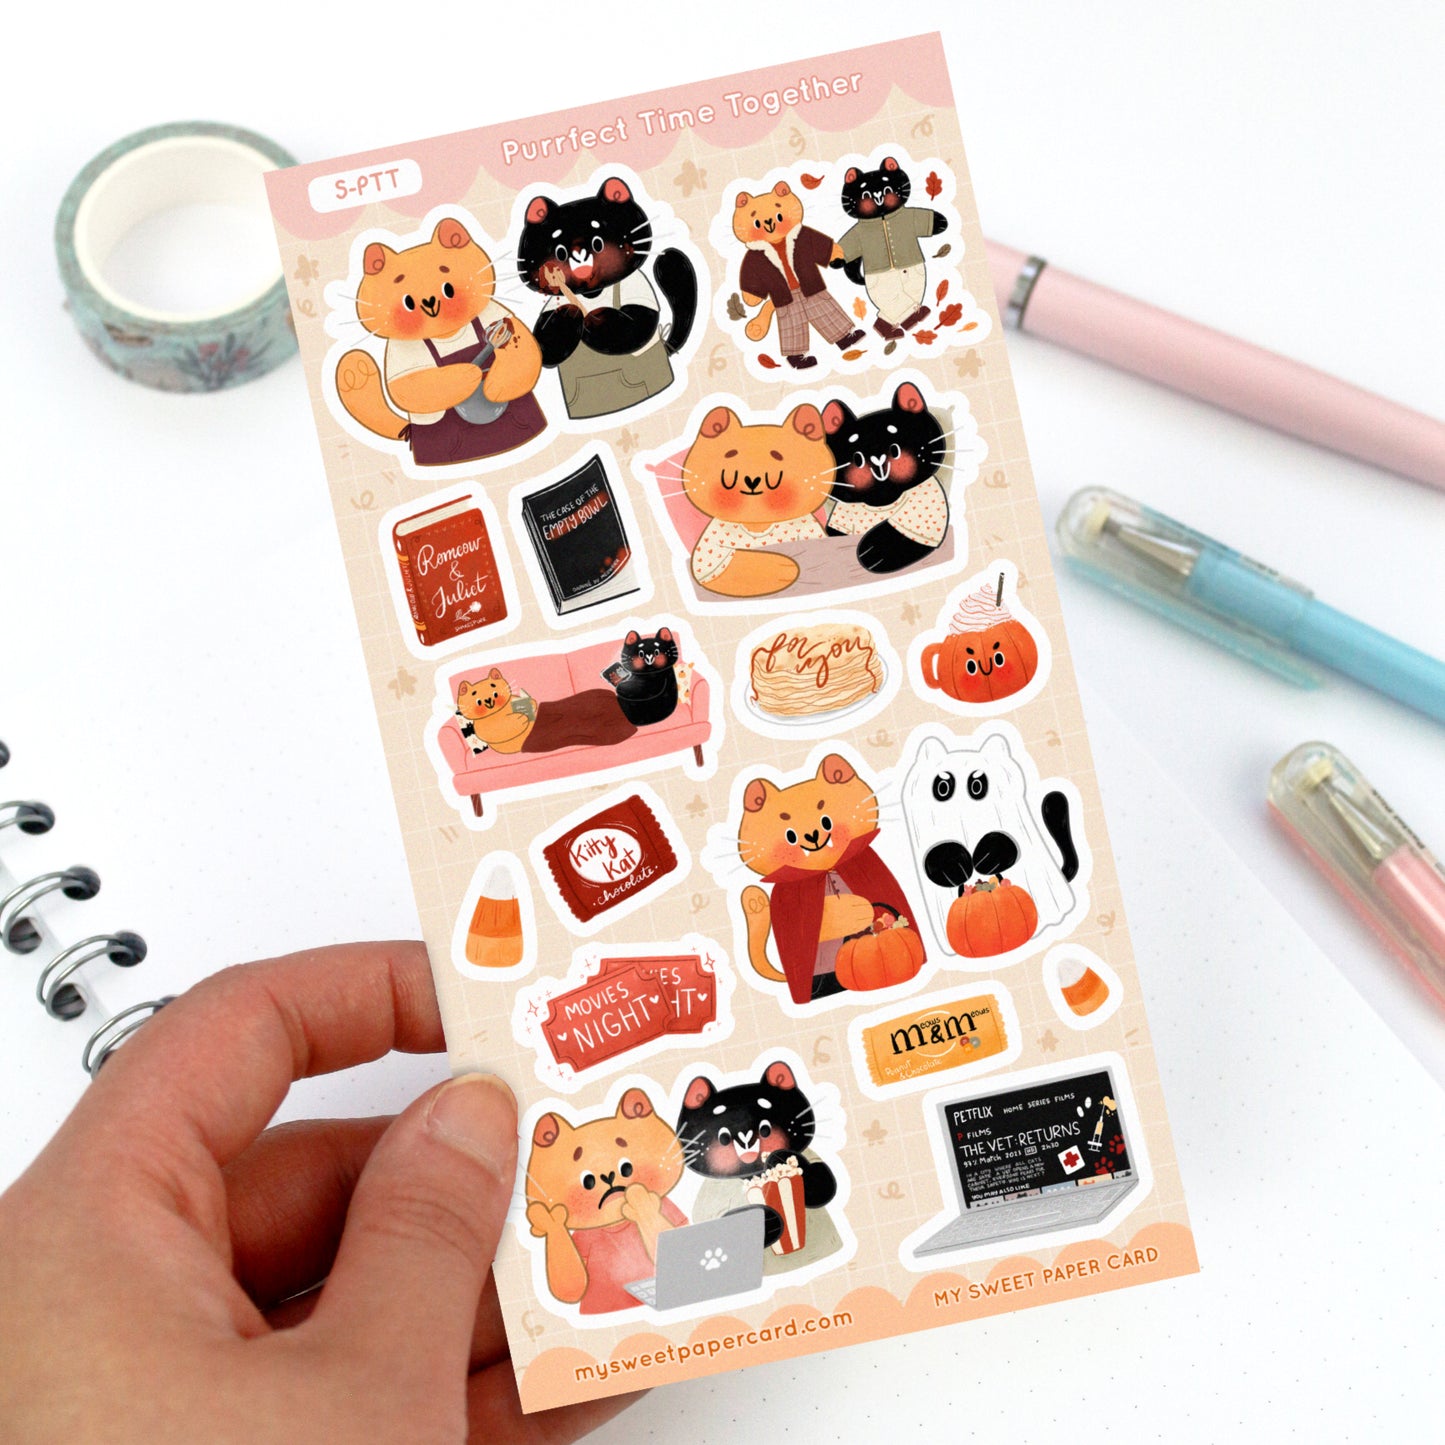 Purr-fect Life Together - Autumn Cat Stickers sheet